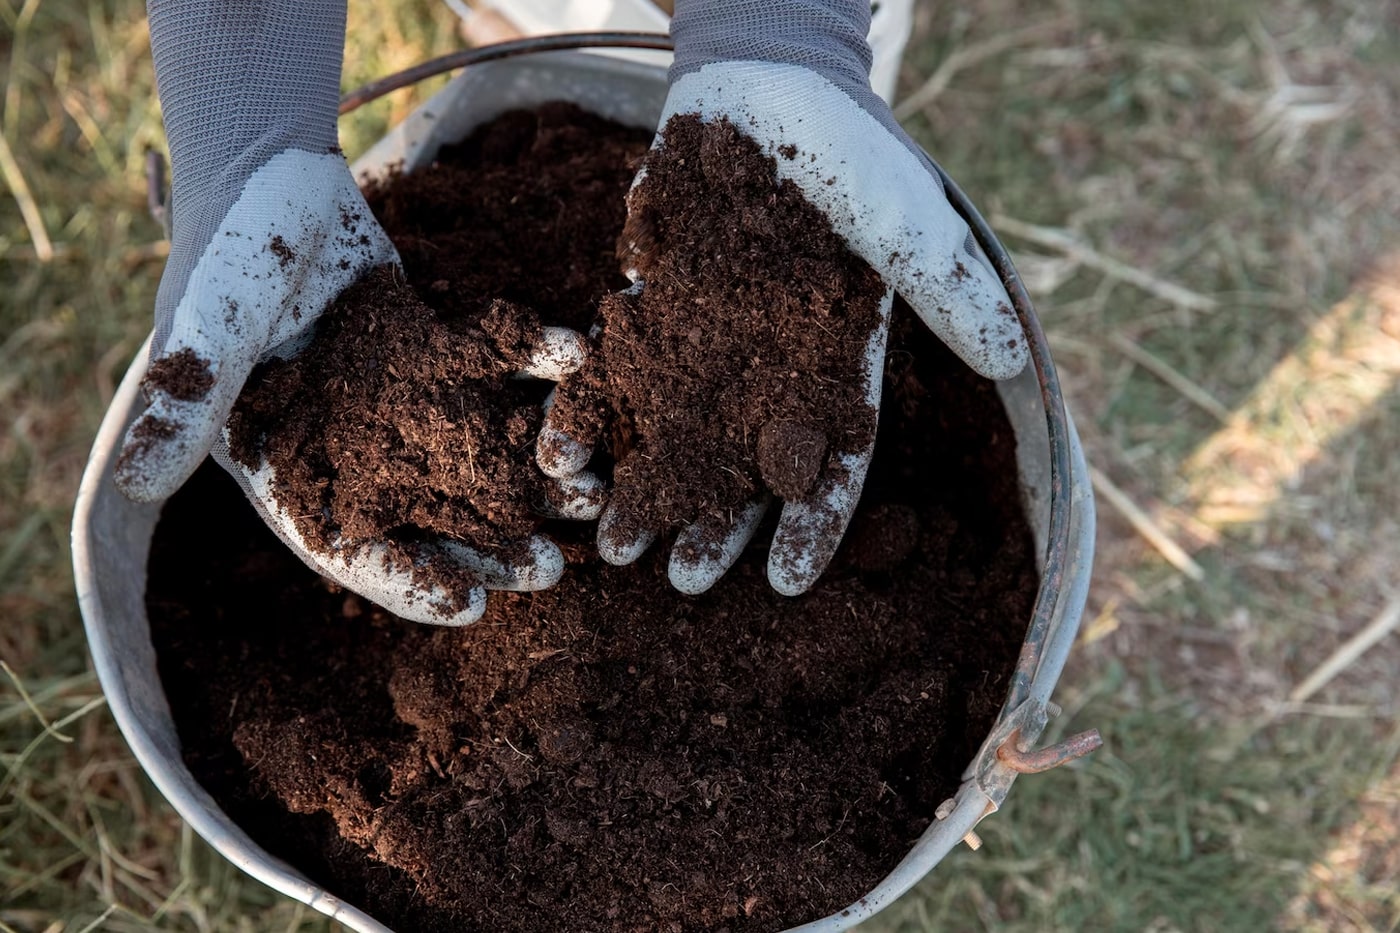 Soil Conditioner vs Compost - Which One Is Better for Plants – ECOgardener